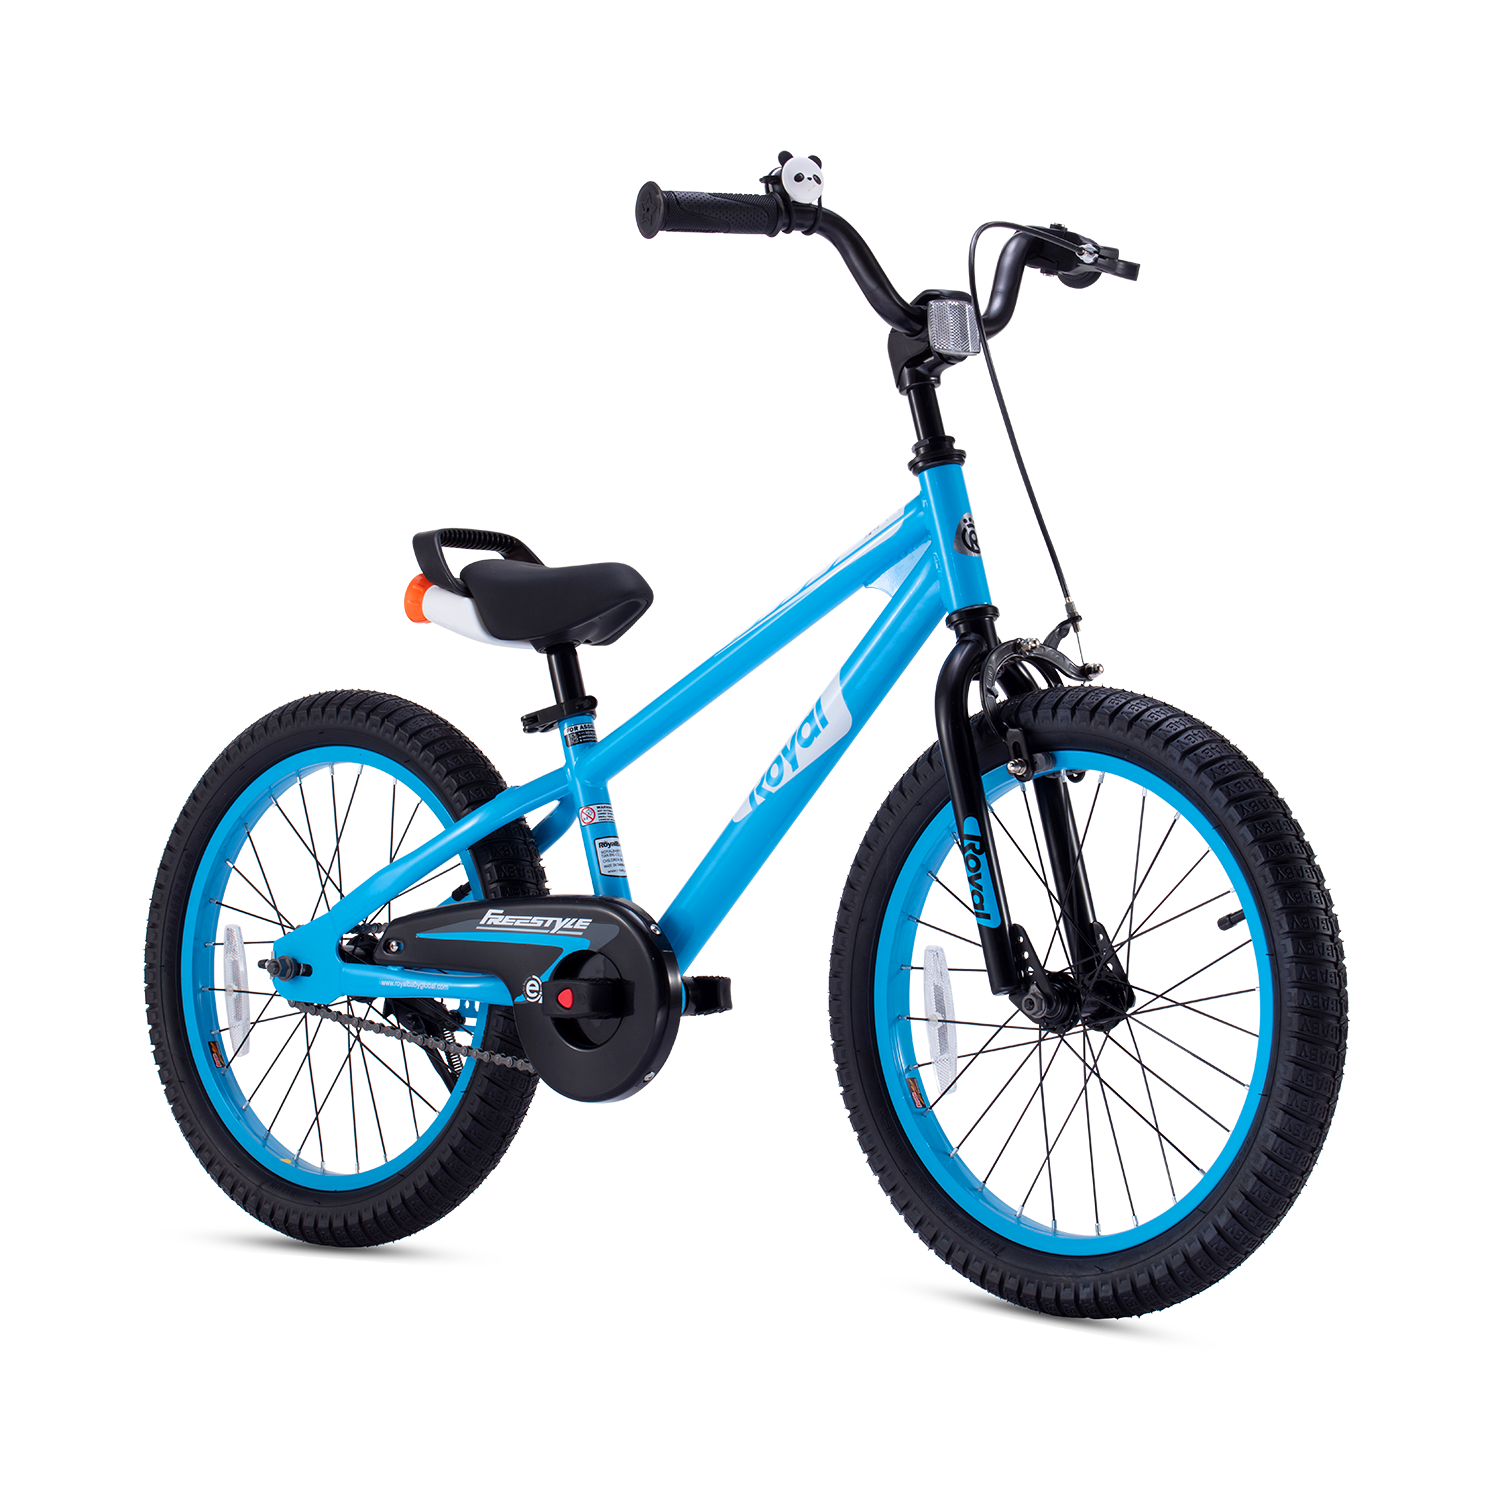 RoyalBaby EZ Kids Bike Easy Learn Balancing to Biking 12 Inch Balance & Pedal bike Instant Assembly for Boys Girls Ages 2-4 Years Blue